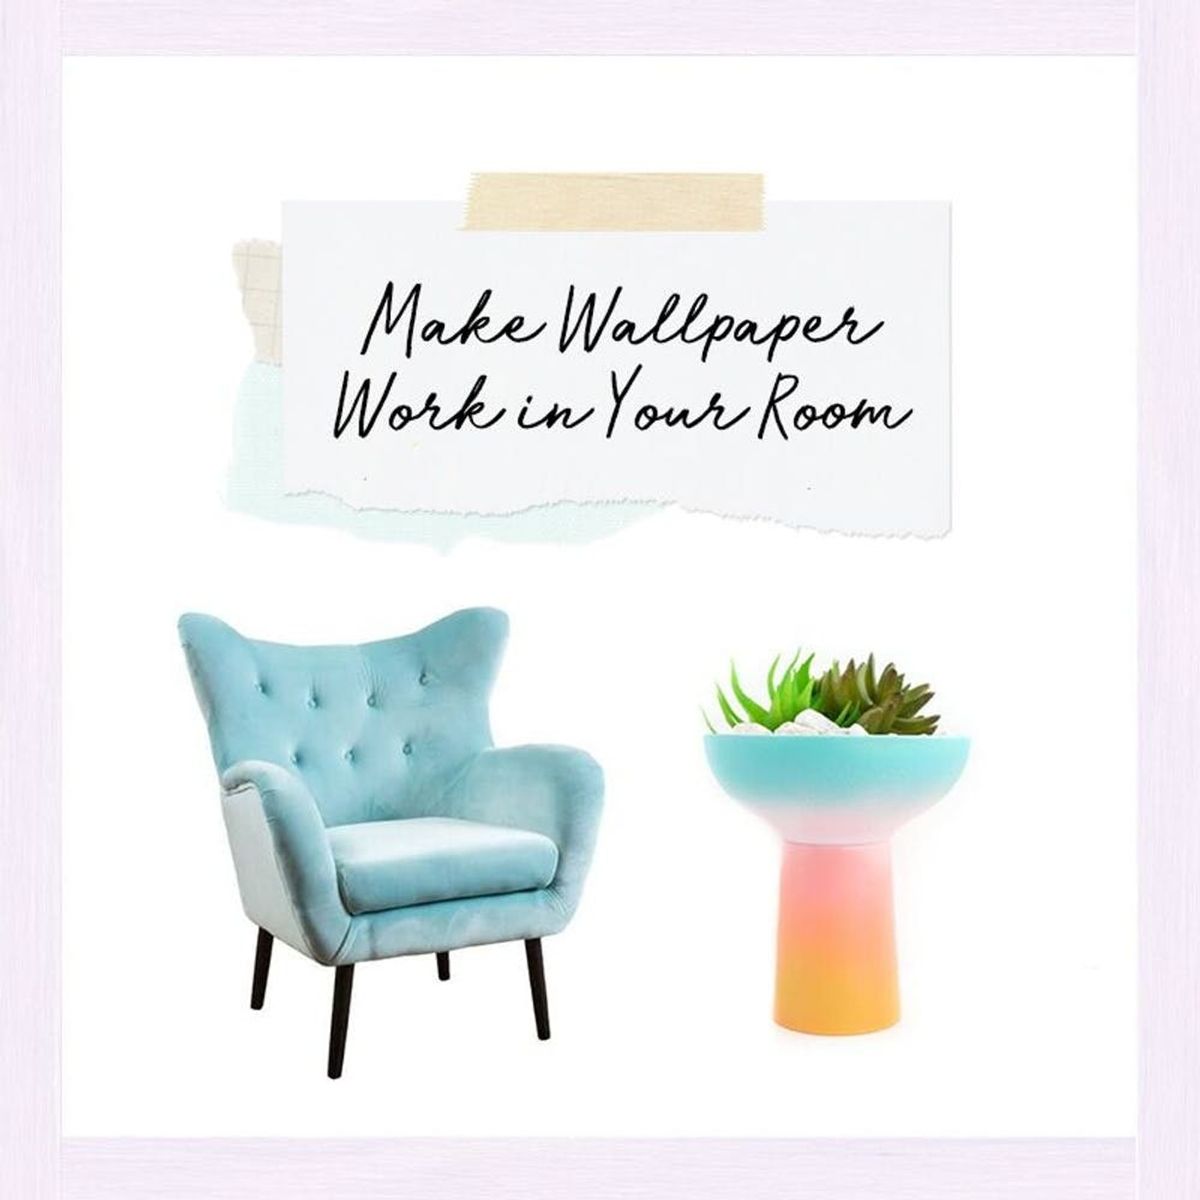 3 Ways to Make Wallpaper Work in Your Room